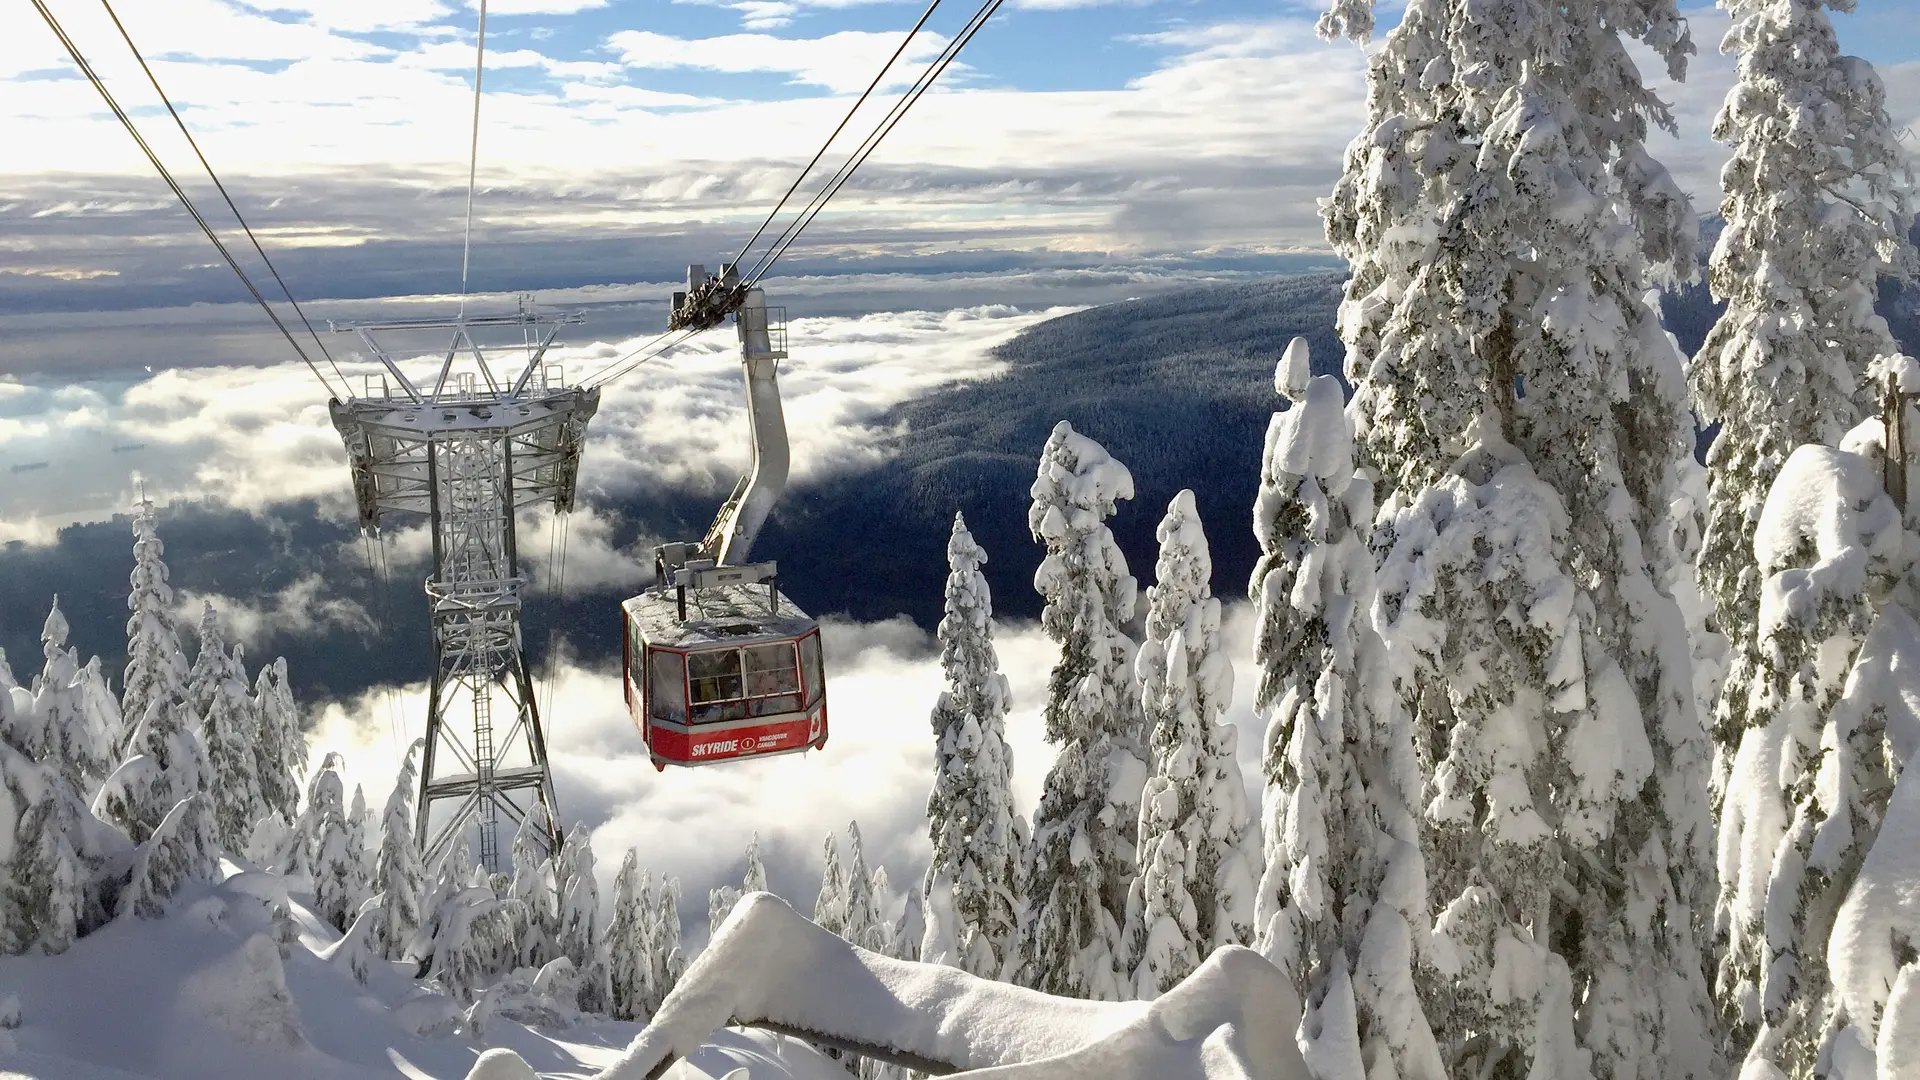 Destinations Articles - Vancouver - Snowy Mountains to Sandy Beaches